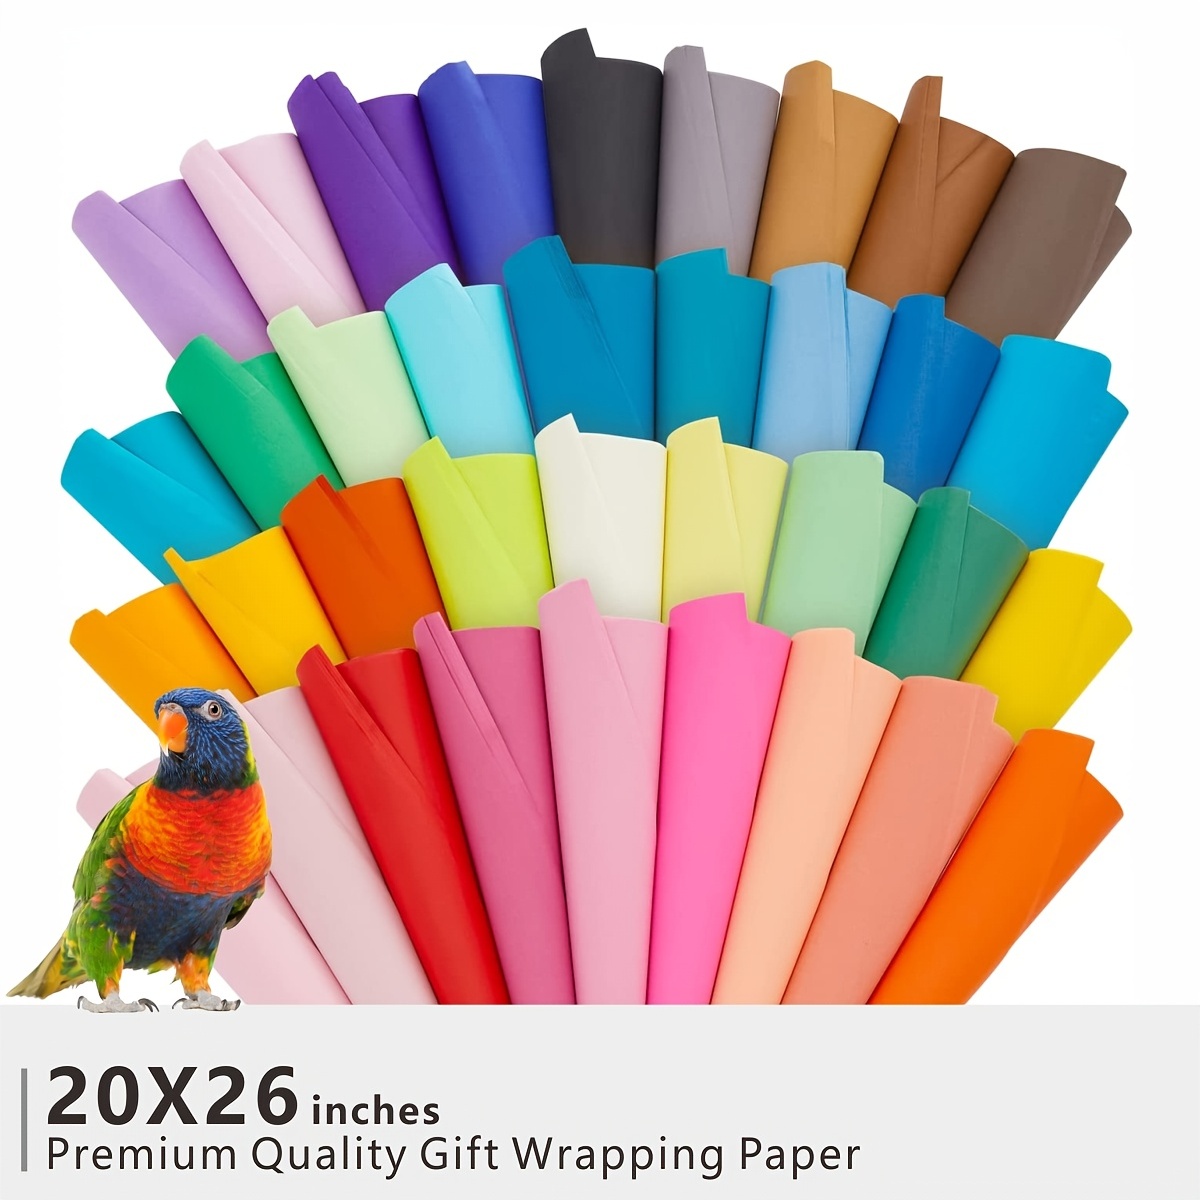 PMLAND 100 Sheets Premium Quality Gift Wrapping Tissue Paper - 20 Assorted  Colors - 26 Inches x 20 Inches